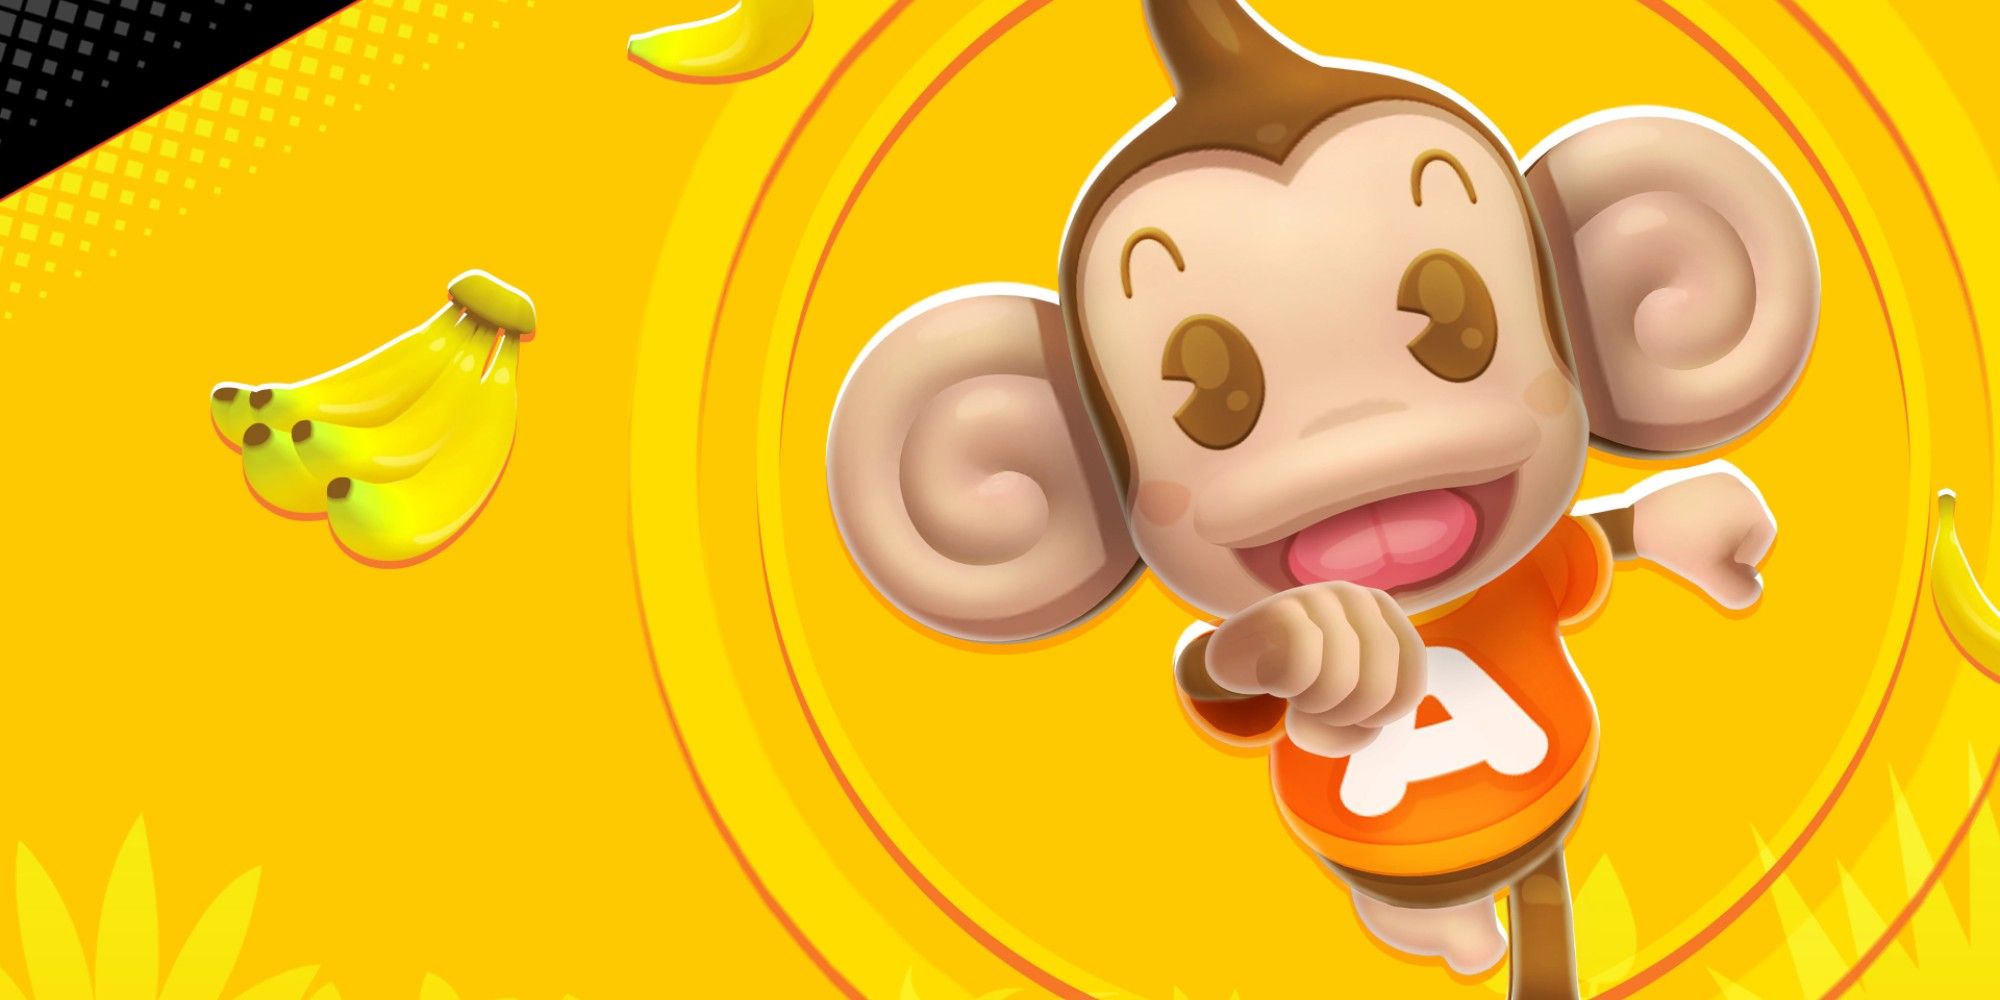 Someone Recreated Super Monkey Ball Without The Balls